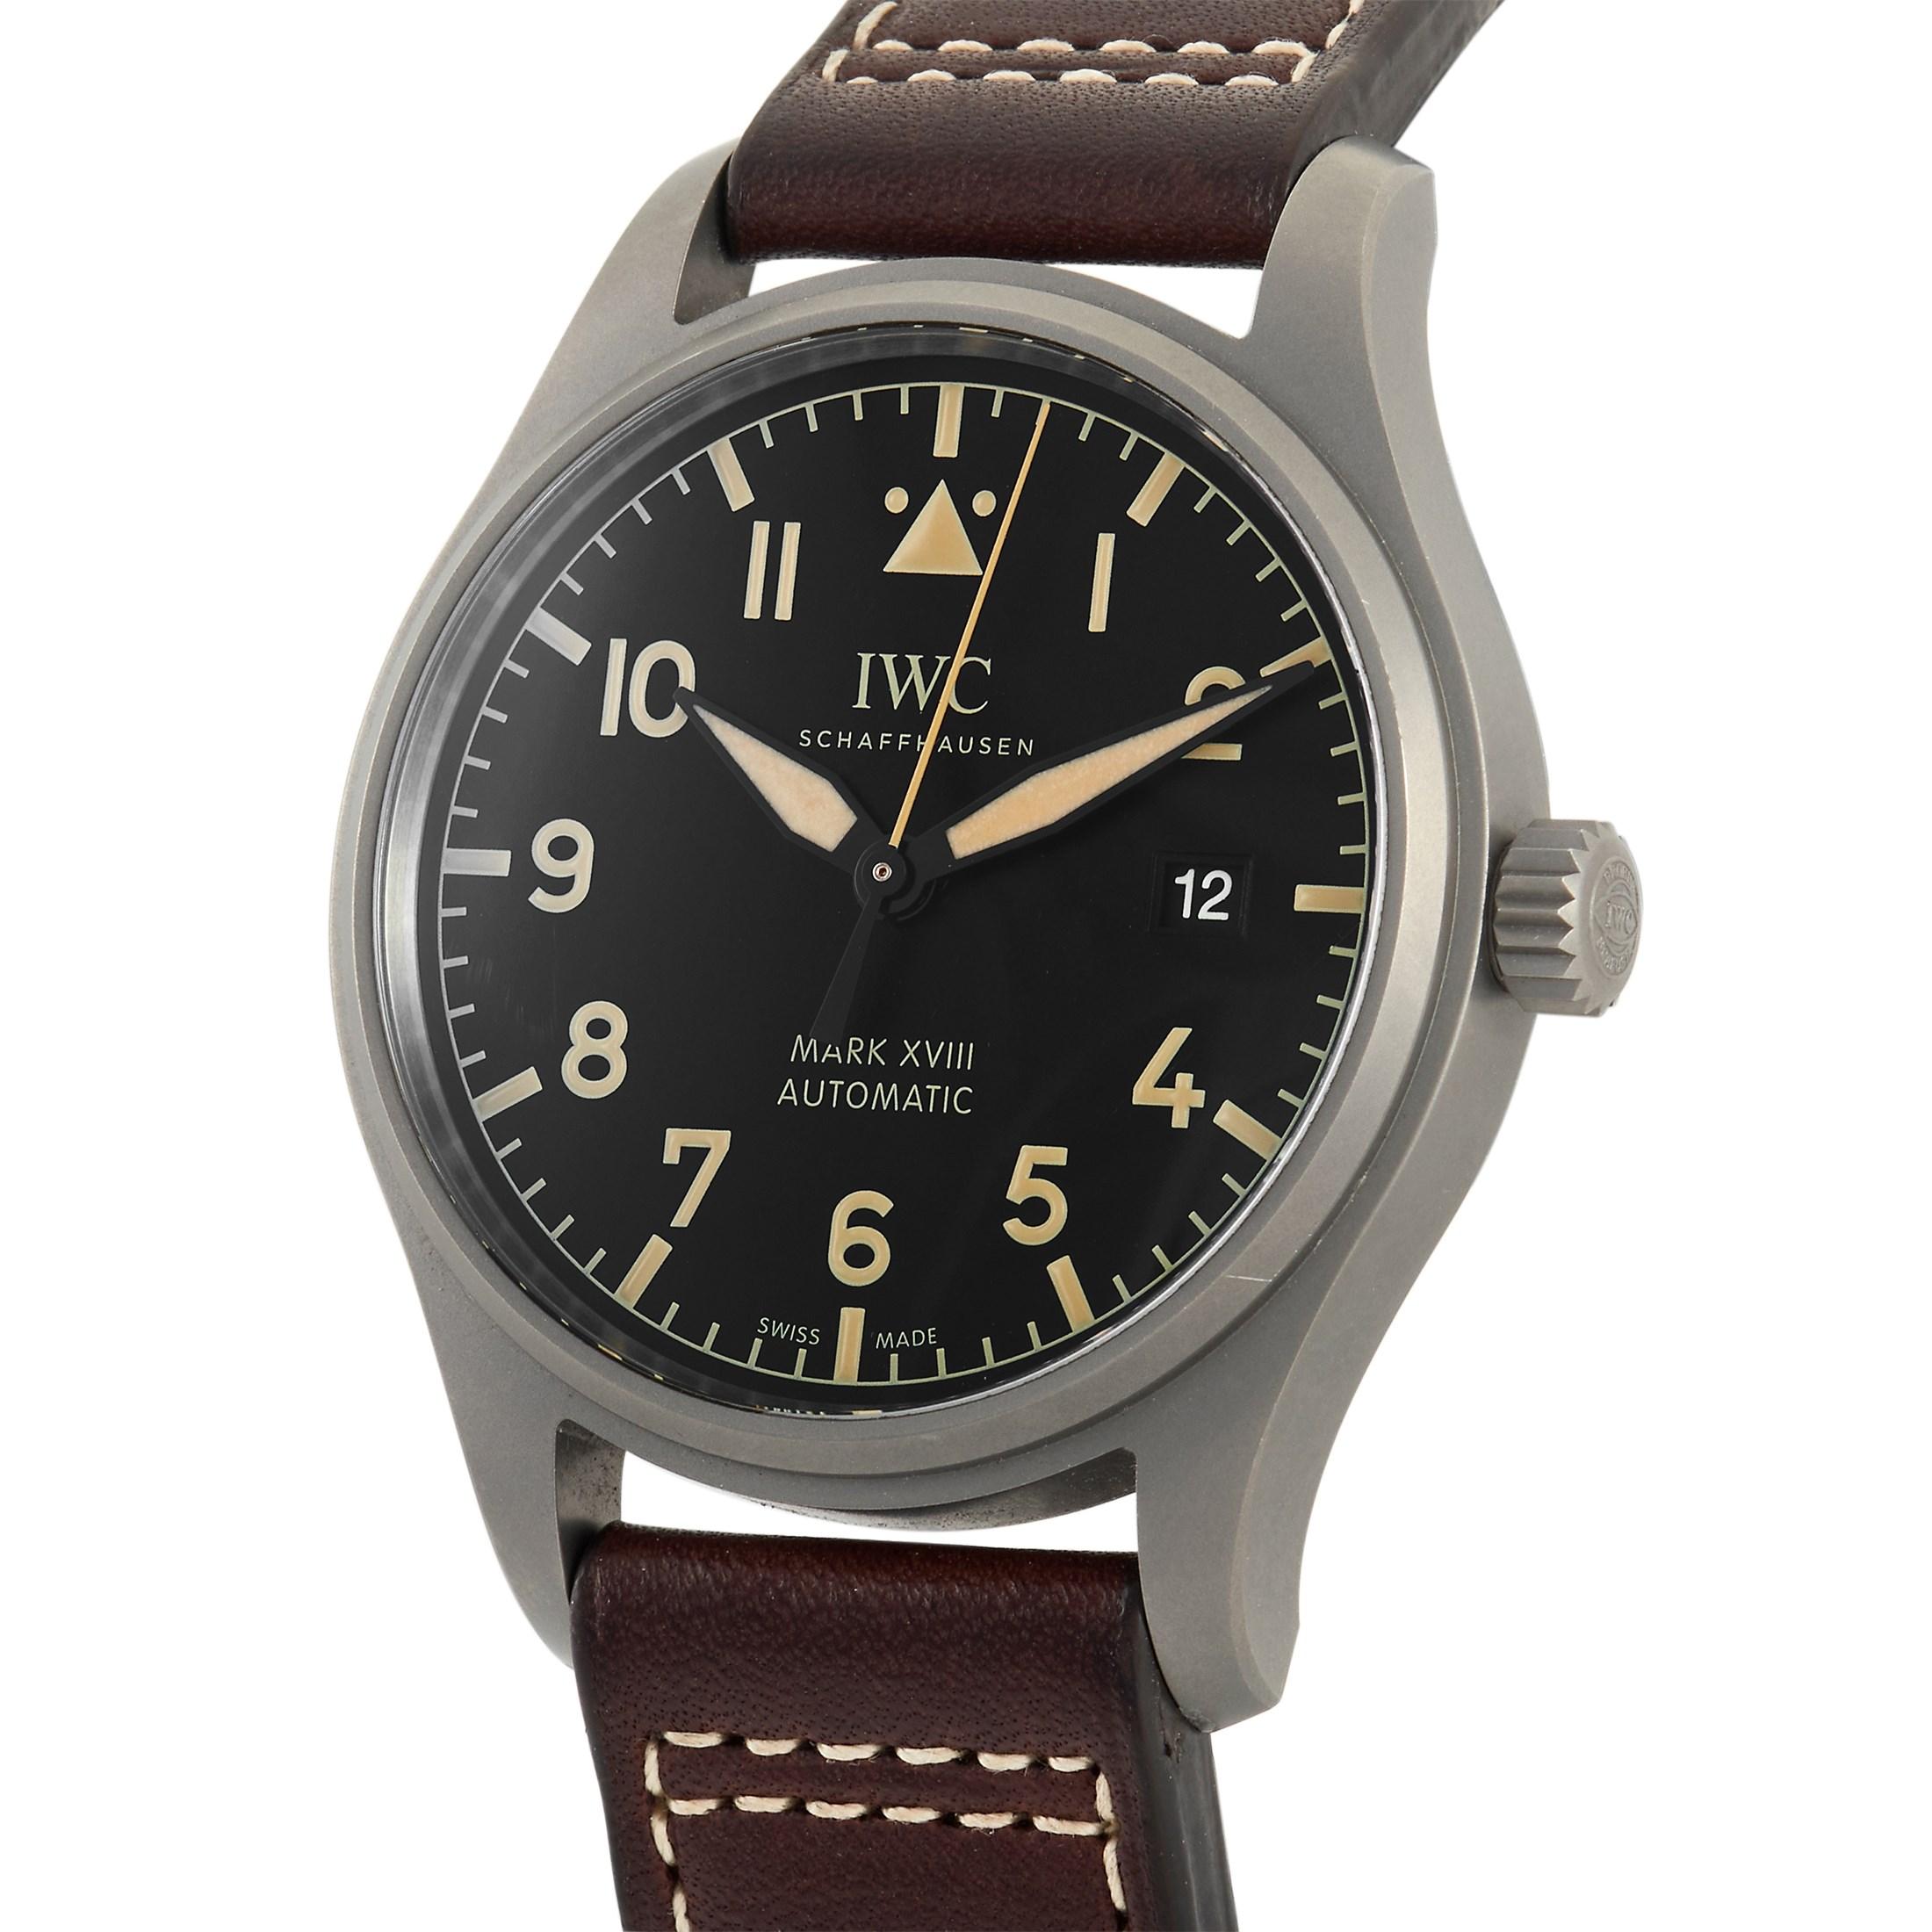 The IWC Pilot Mark XVIII Heritage Titanium Watch 327006 was released in 2017 and features a wearable 40mm case in titanium. It bears a self-winding movement, Caliber 35111, with 42-hour power reserve. The watch features a solid case back, a brown